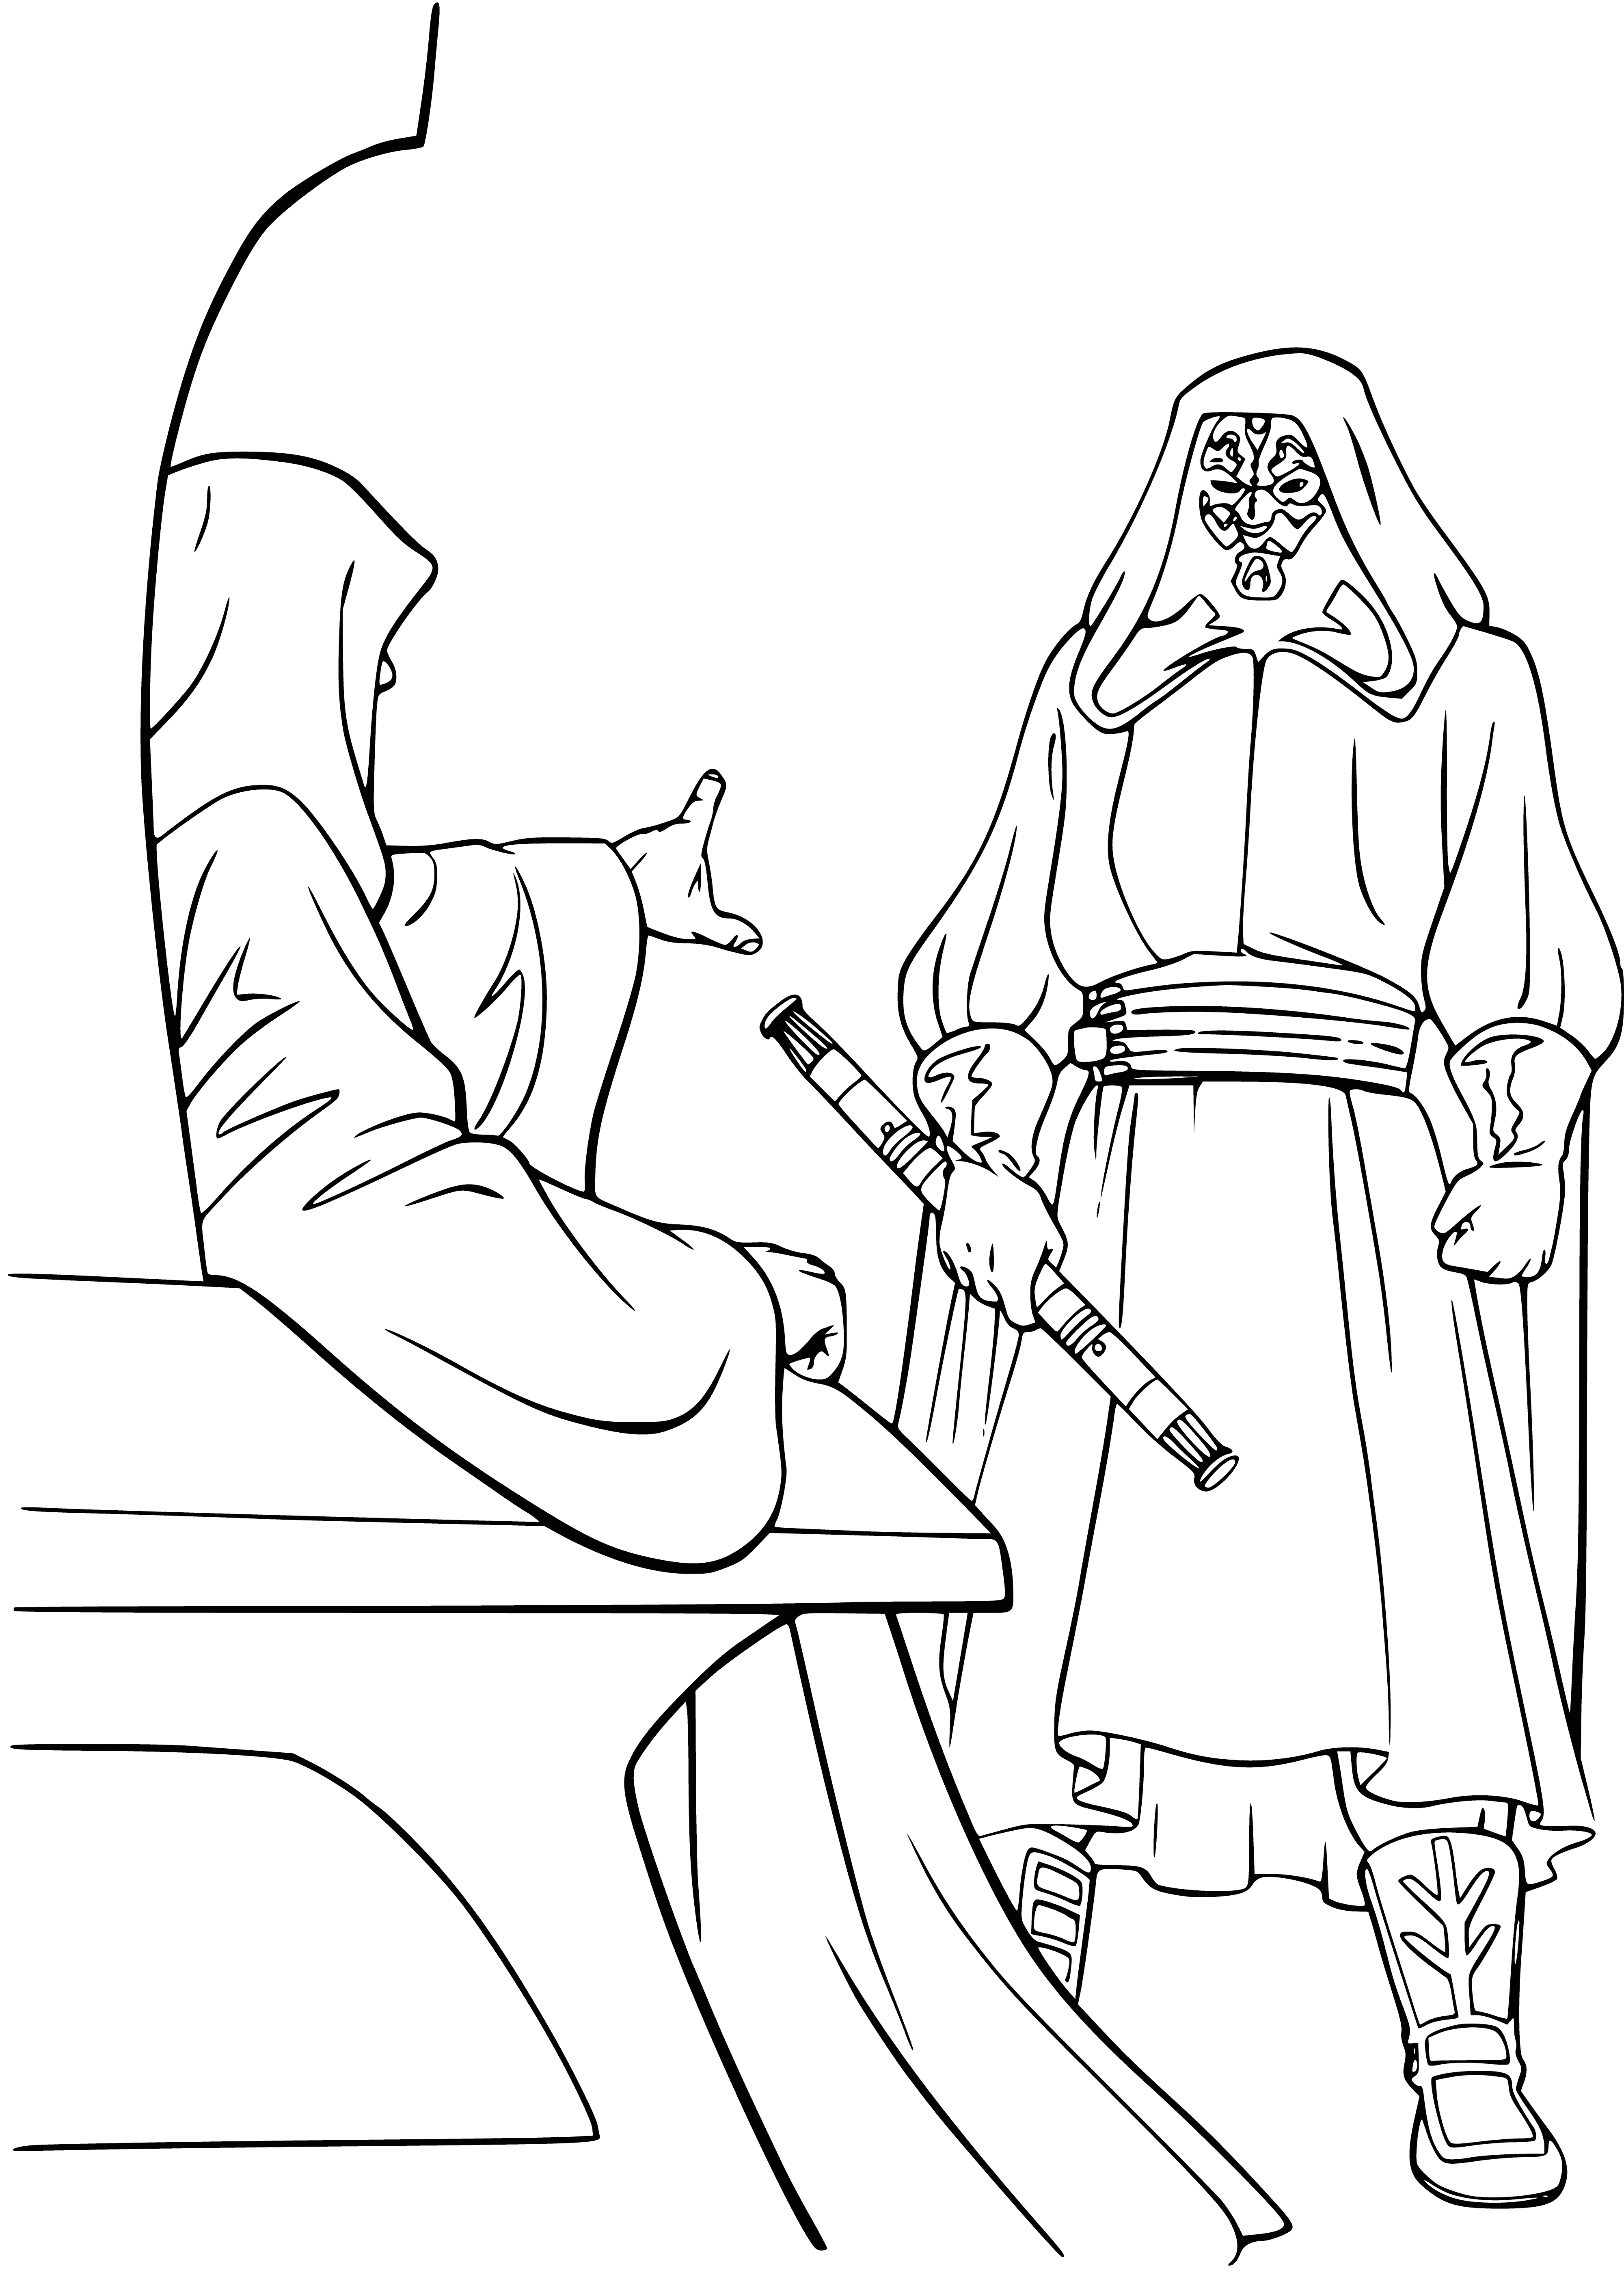 coloring page: Sidious & apprentice plan intricate strategy, rocking back & forth between the window backdrop of a planet & their menacing stares. #SithLords